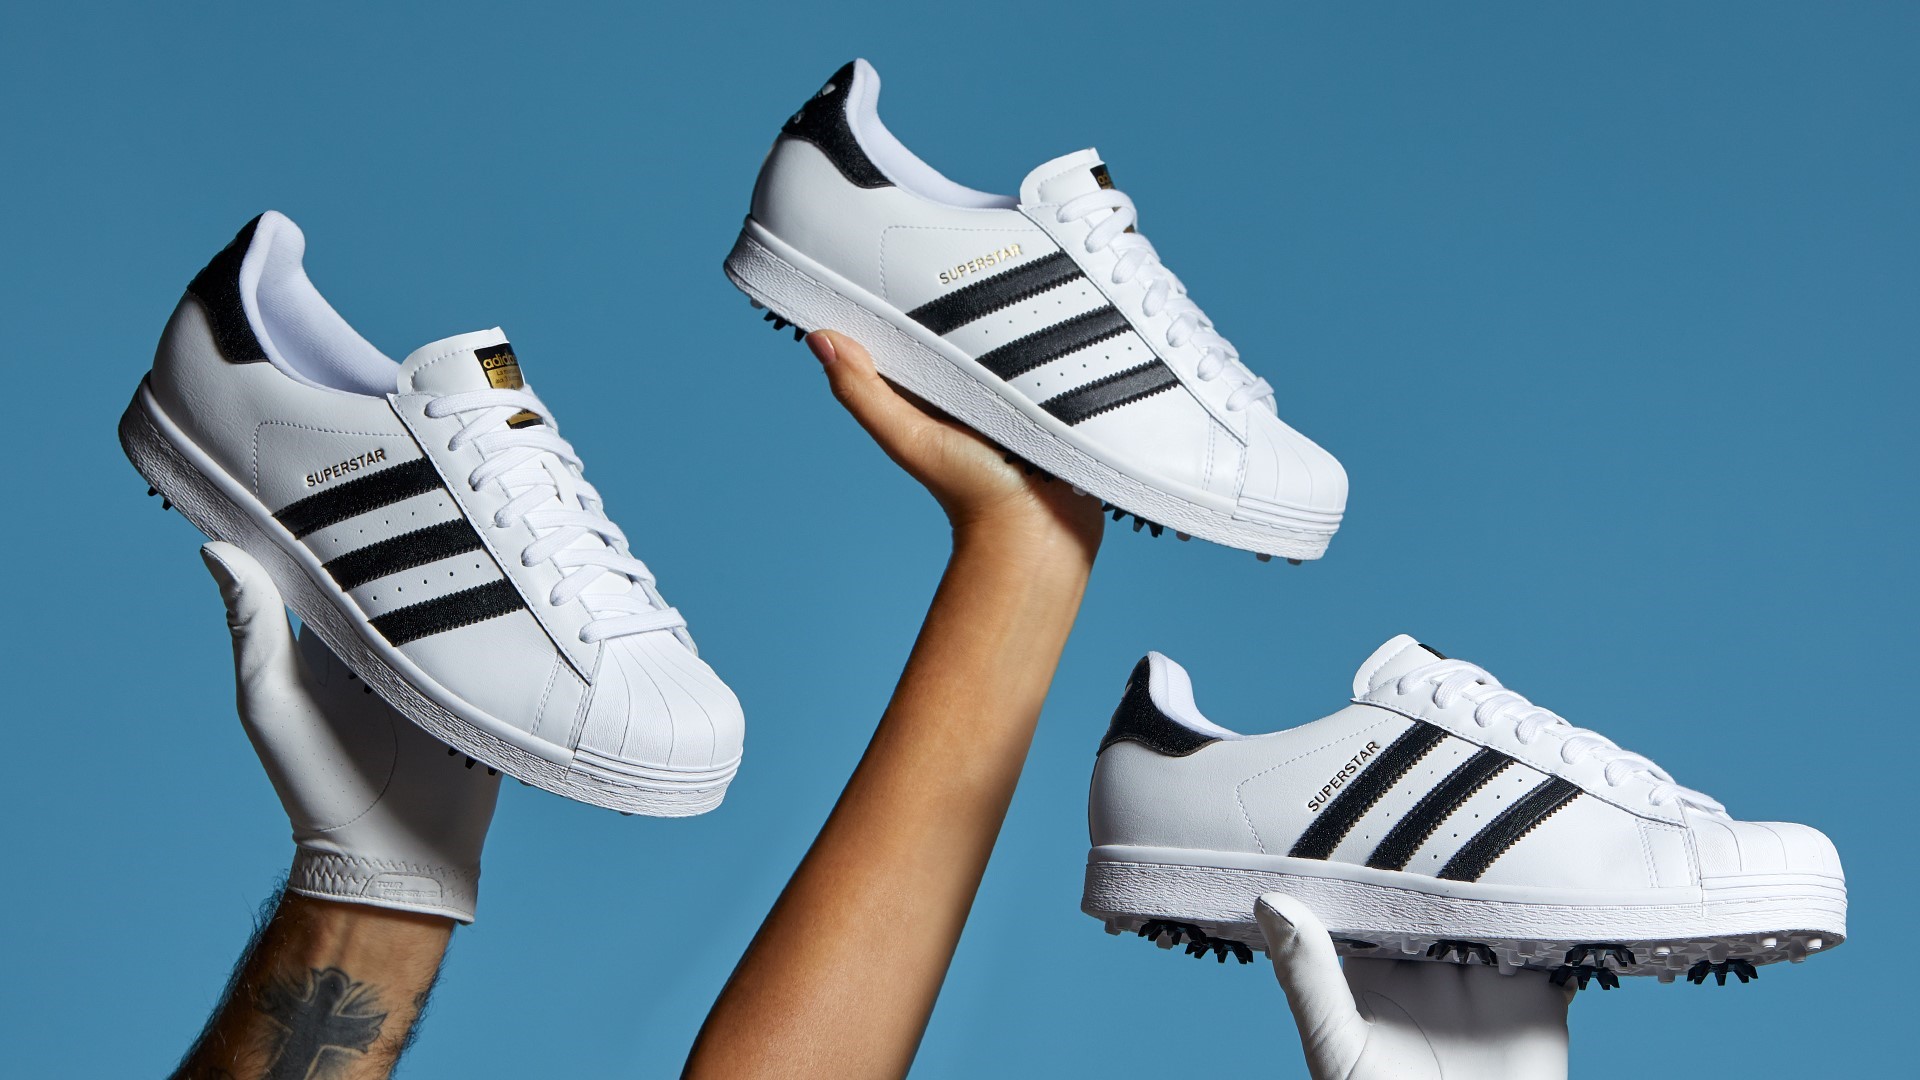 Limited Edition Superstar Brings Iconic 3-Stripes Footwear the Course